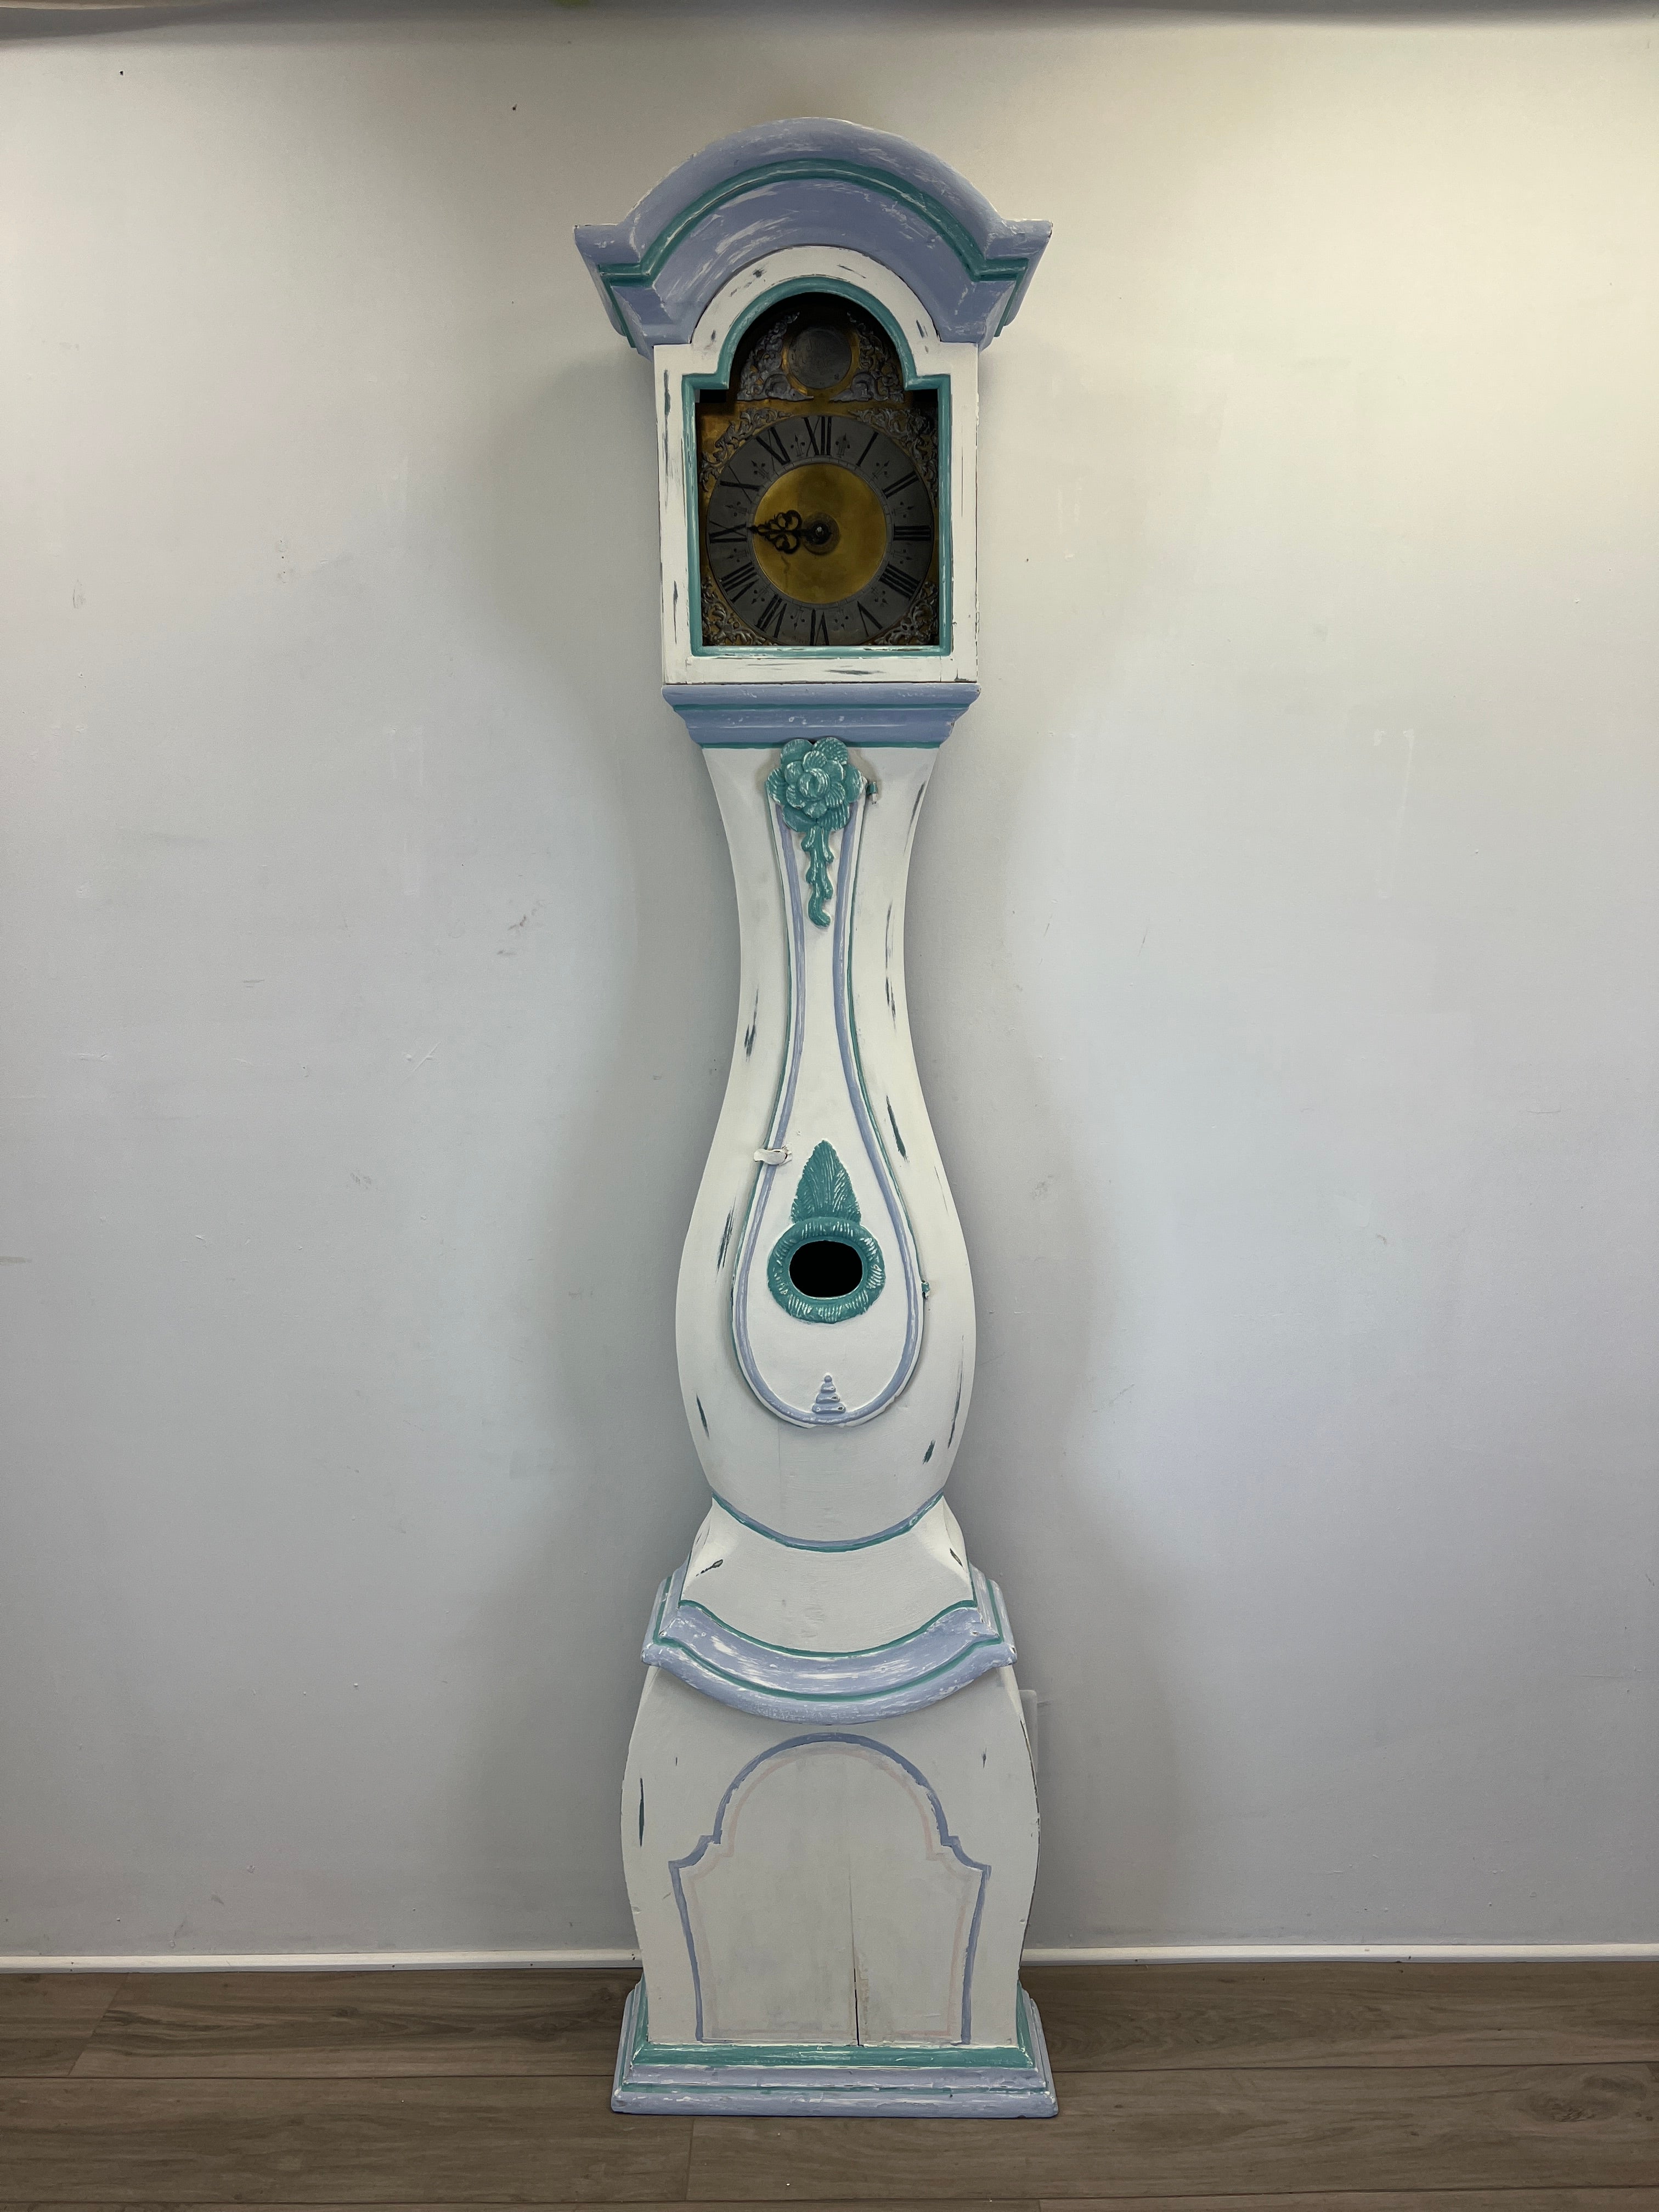 White re-painted baroque long case clock from the early 18th Century. This clock was originally blue but we've repainted it in white and Louis Blue. The clock is Swedish and made from Swedish pine with the design and clock face from the 18th